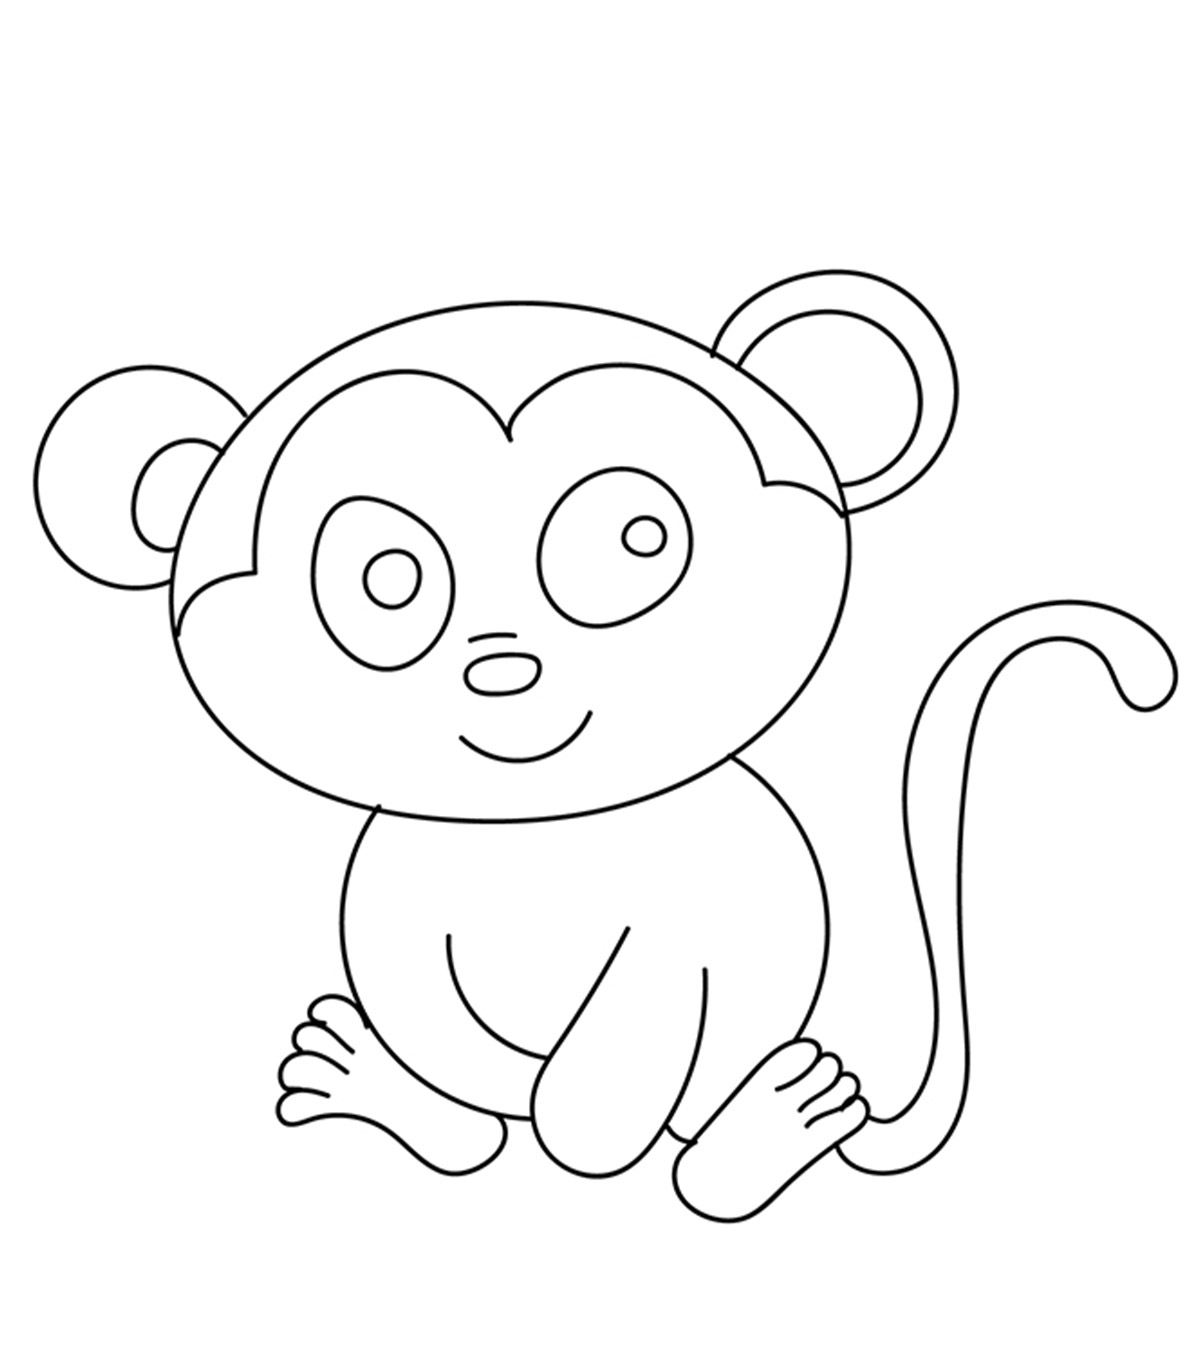 10 Lovely Chimpanzee Coloring Pages For Toddlers